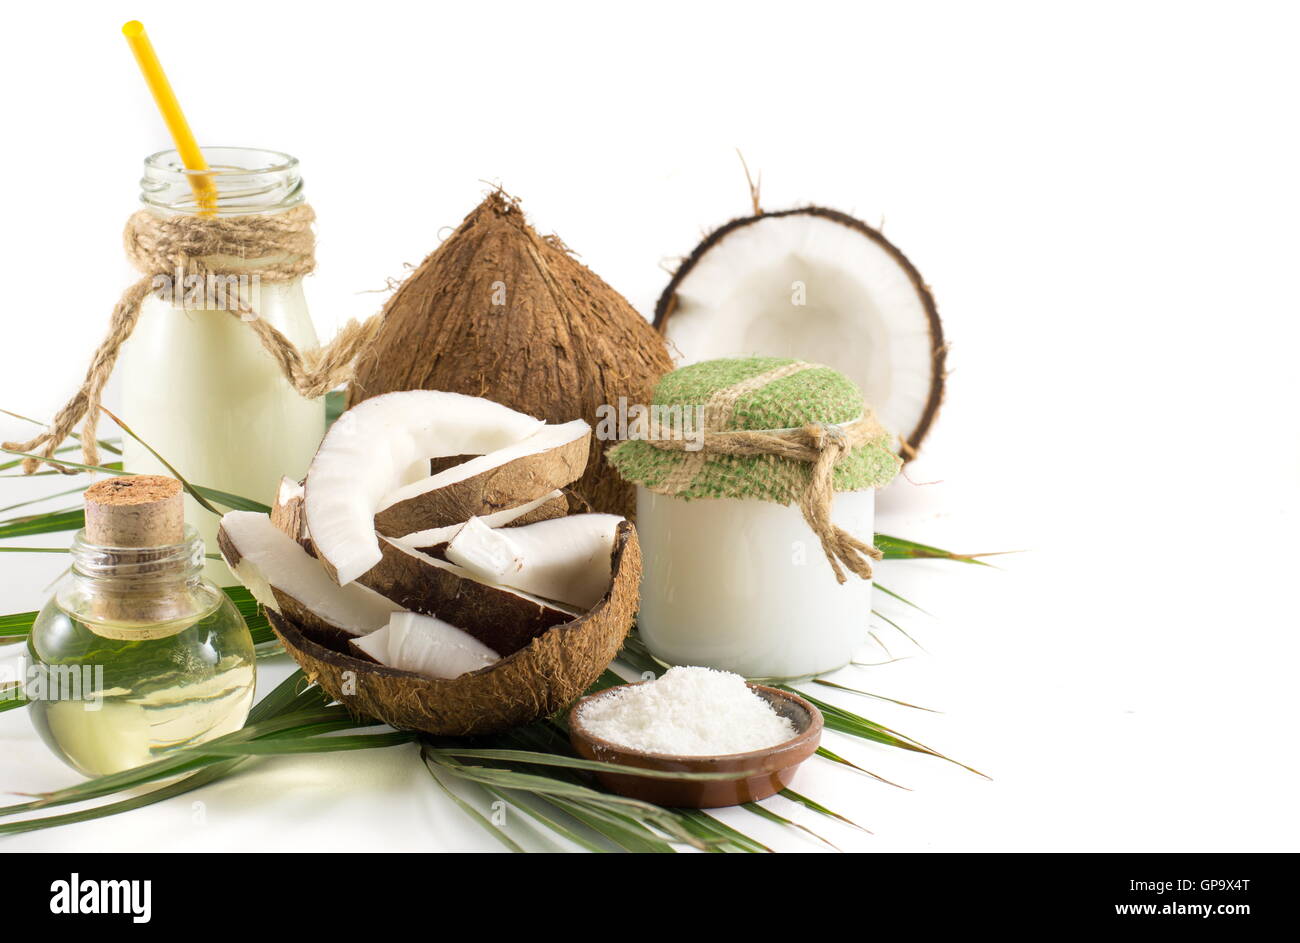 Coconut products with fresh fruit milk and oil Stock Photo